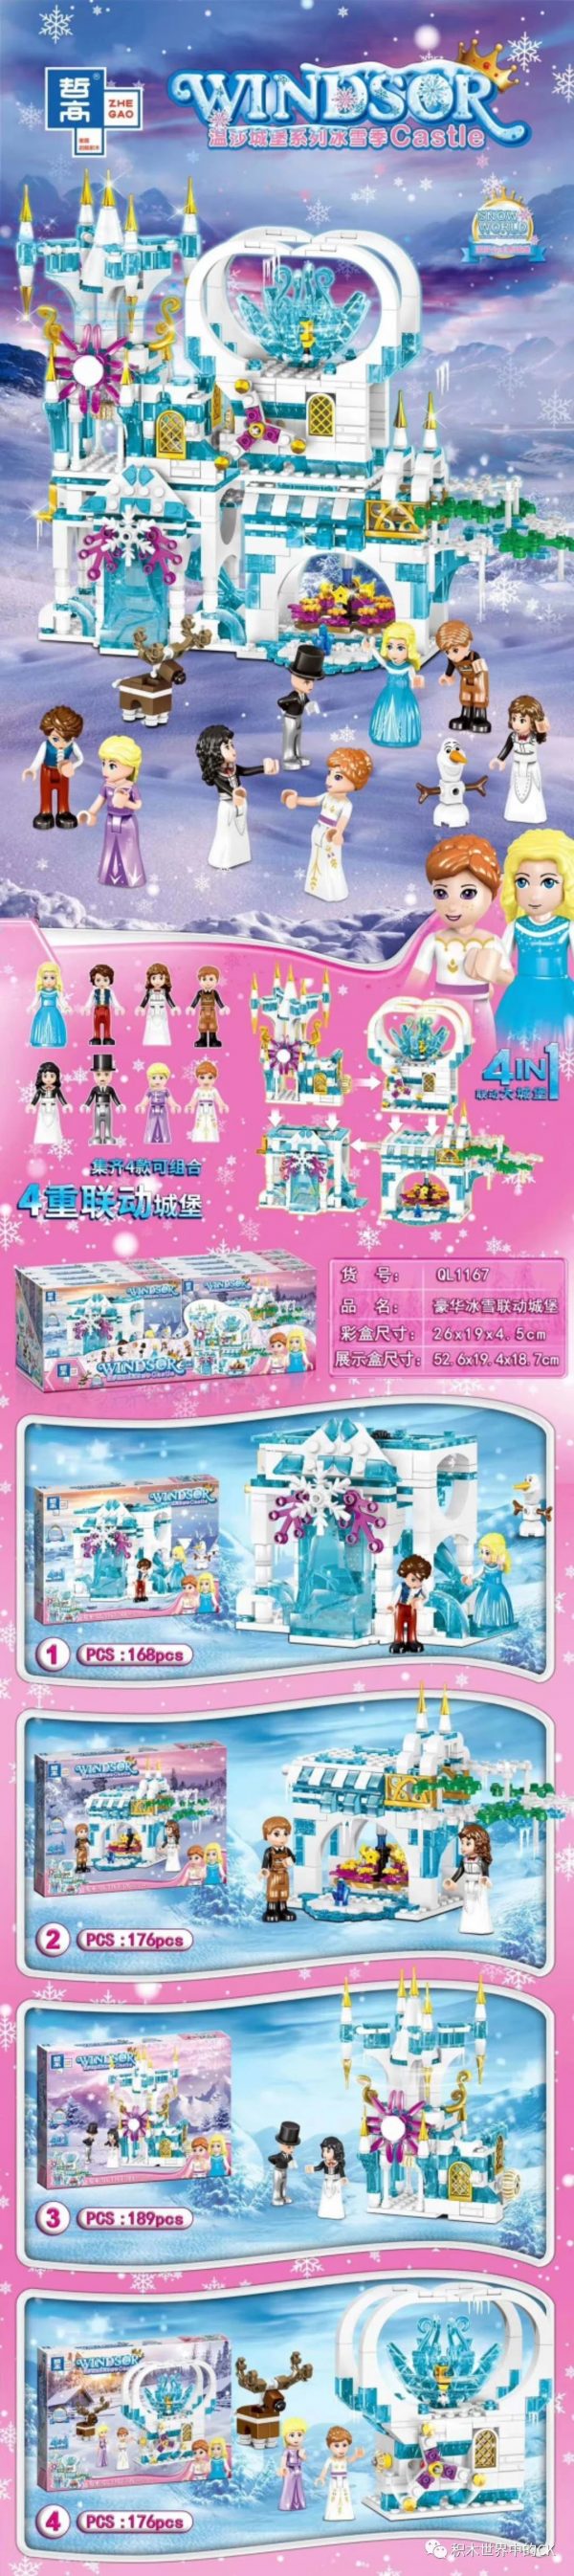 ZHEGAO QL1167 Windsor Castle Series Ice and Snow Season: Luxury Ice and Snow Link Castle 4 combinations 0